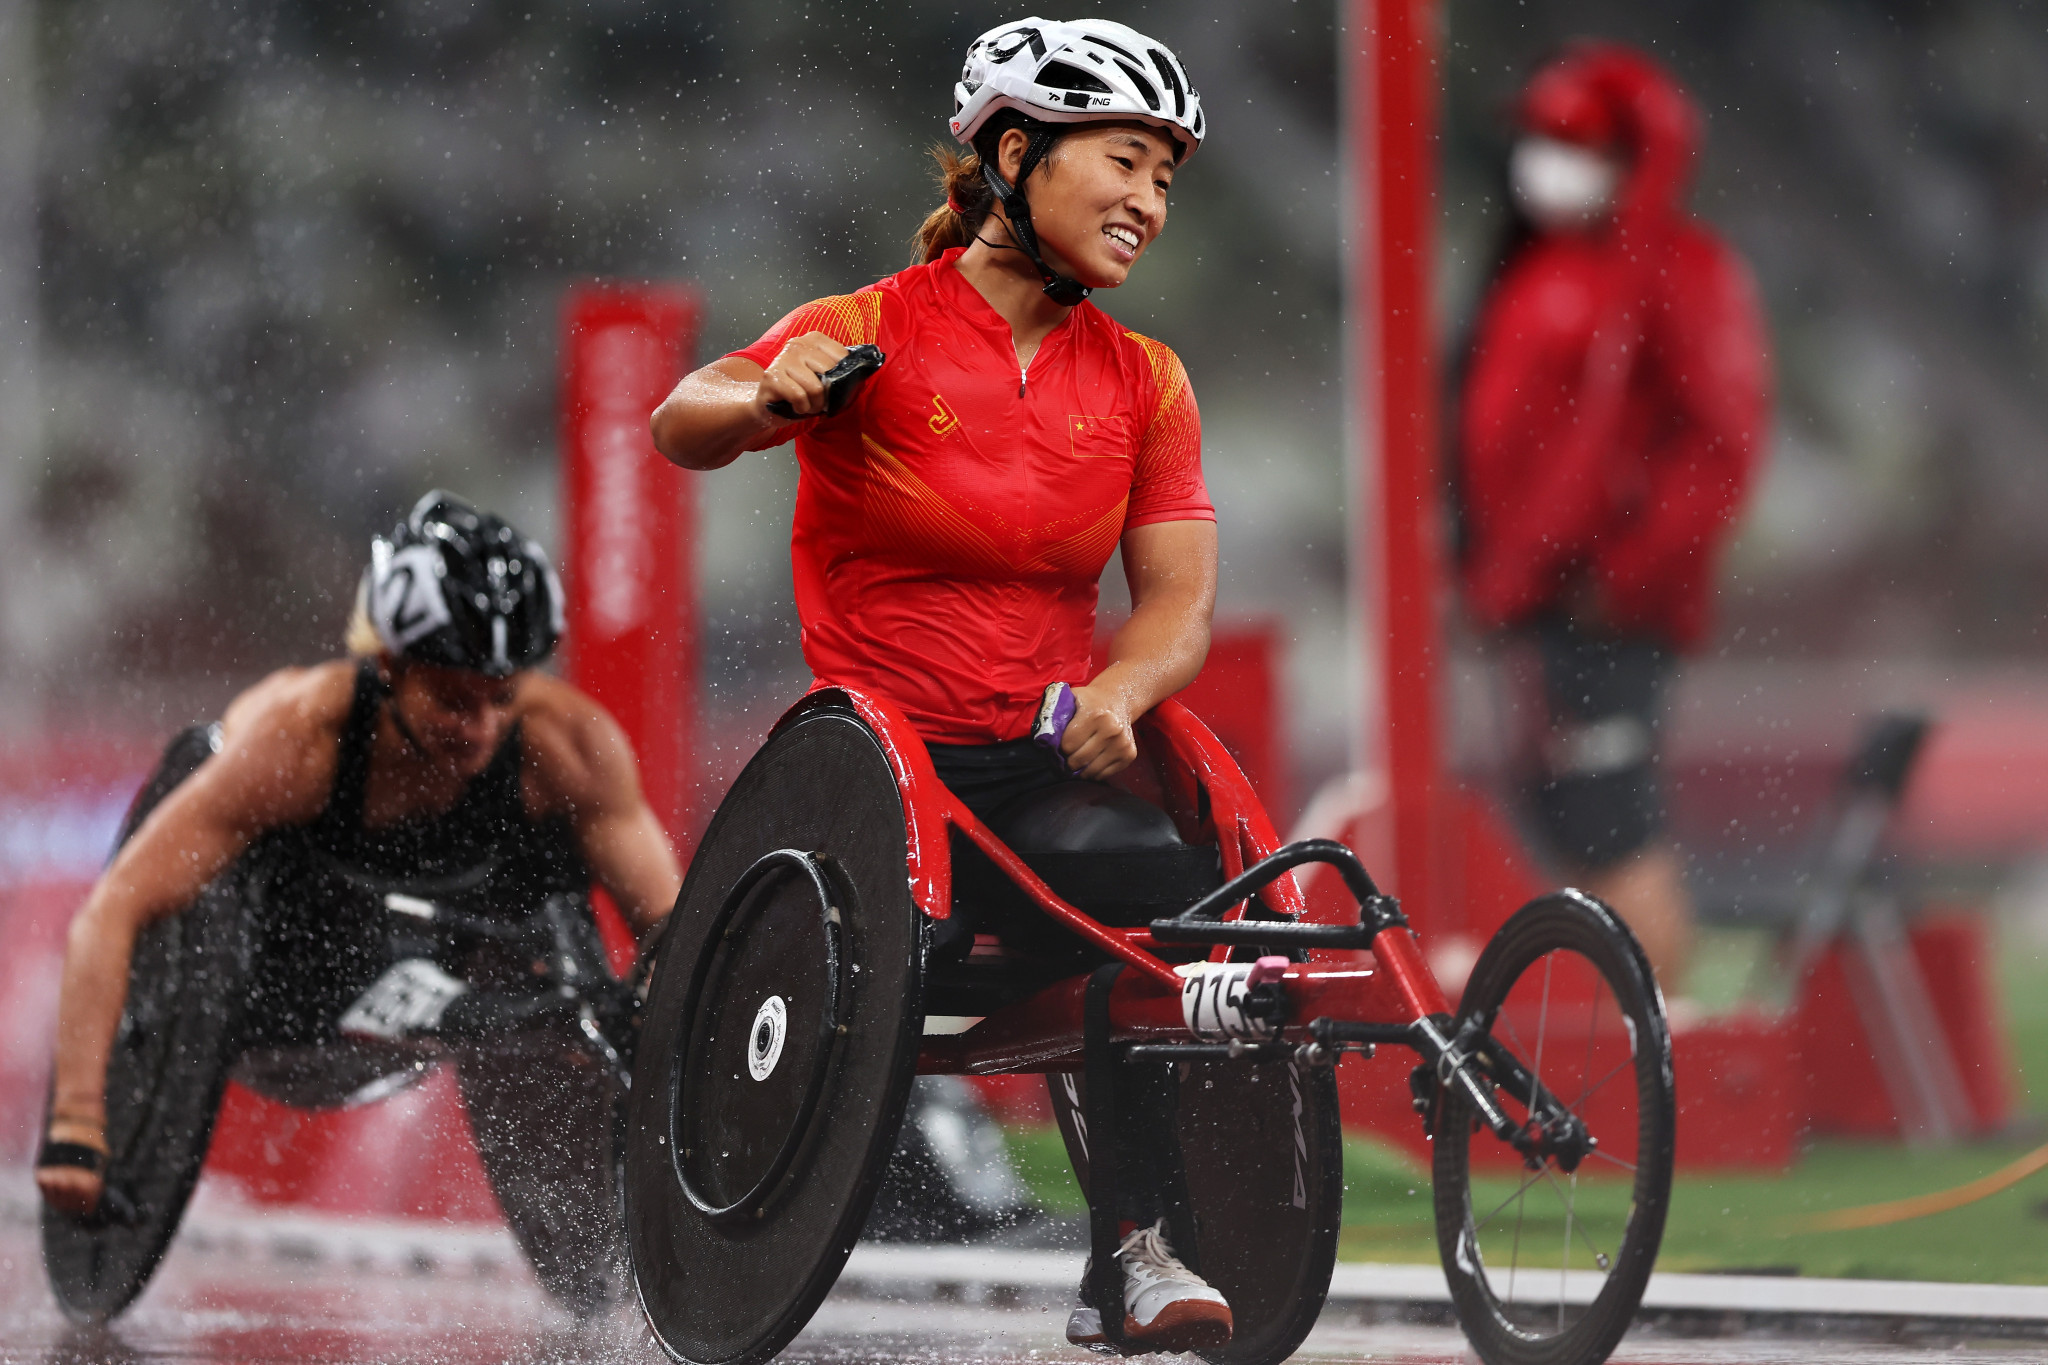 Zhou Zhaoqian mastered the conditions to win the women's T54 1500m event ©Getty Images